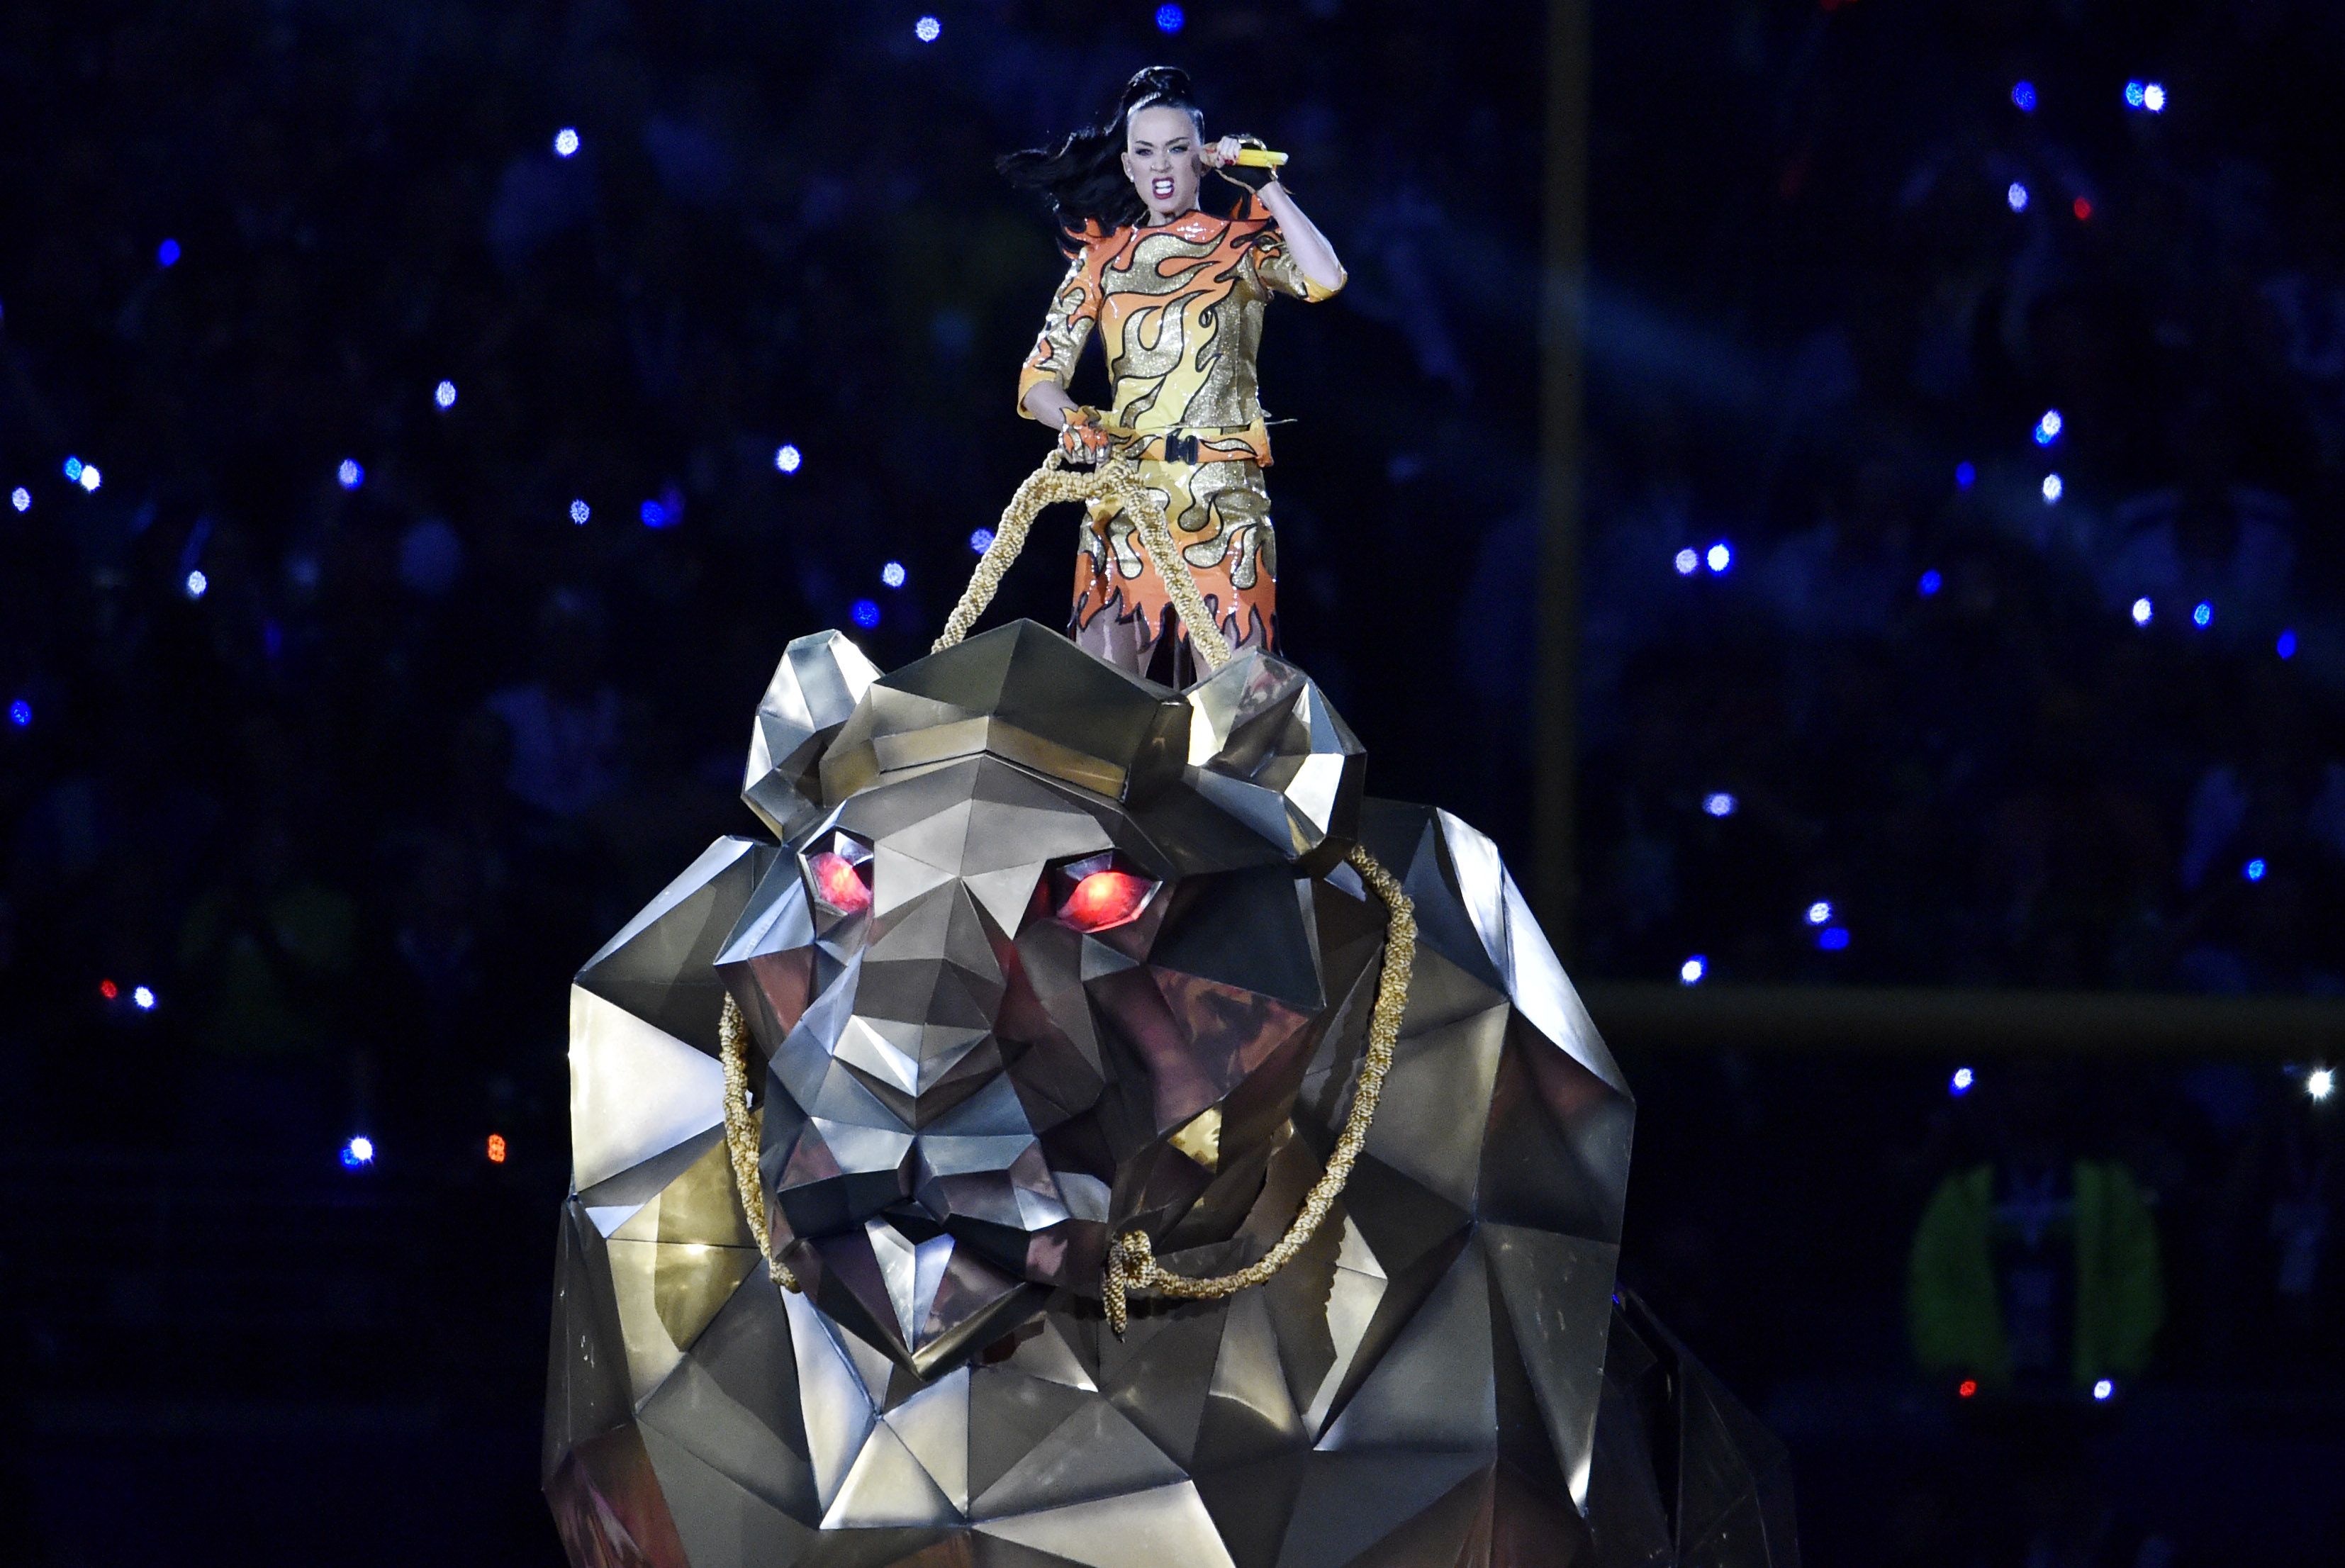 5. Katy Perry's Short Blue Hair Outfit at the 2015 Super Bowl Halftime Show - wide 4